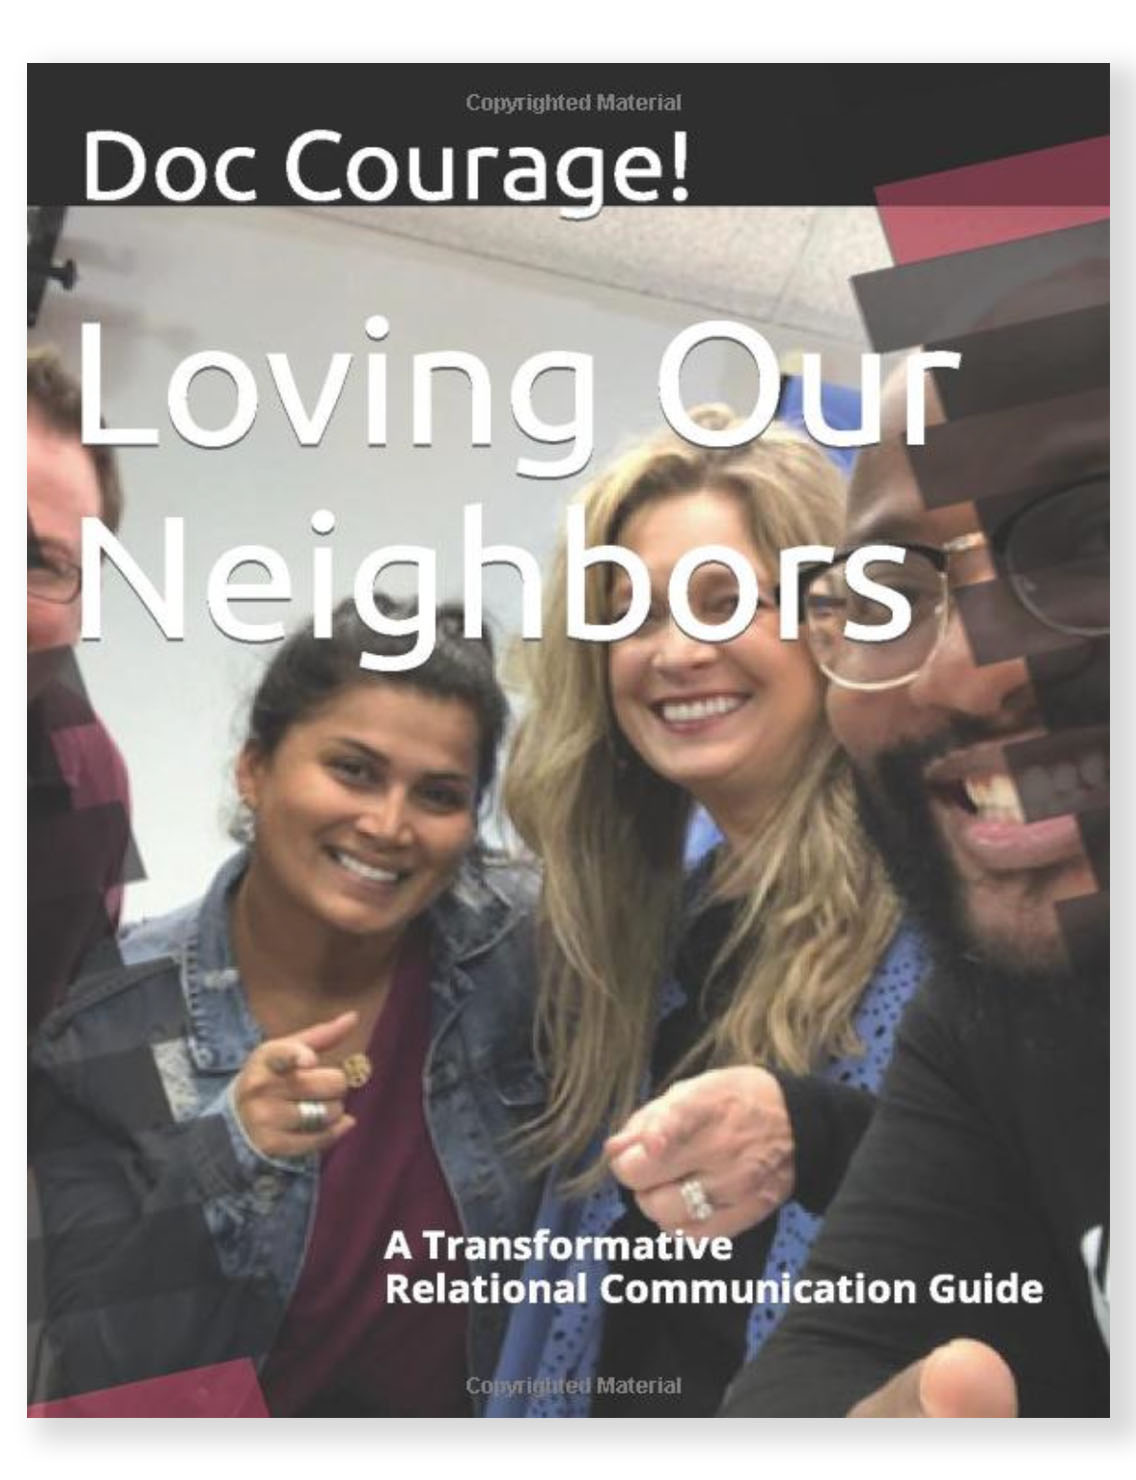 Loving Our Neighbors: A Transformative, Relational Communication Guide